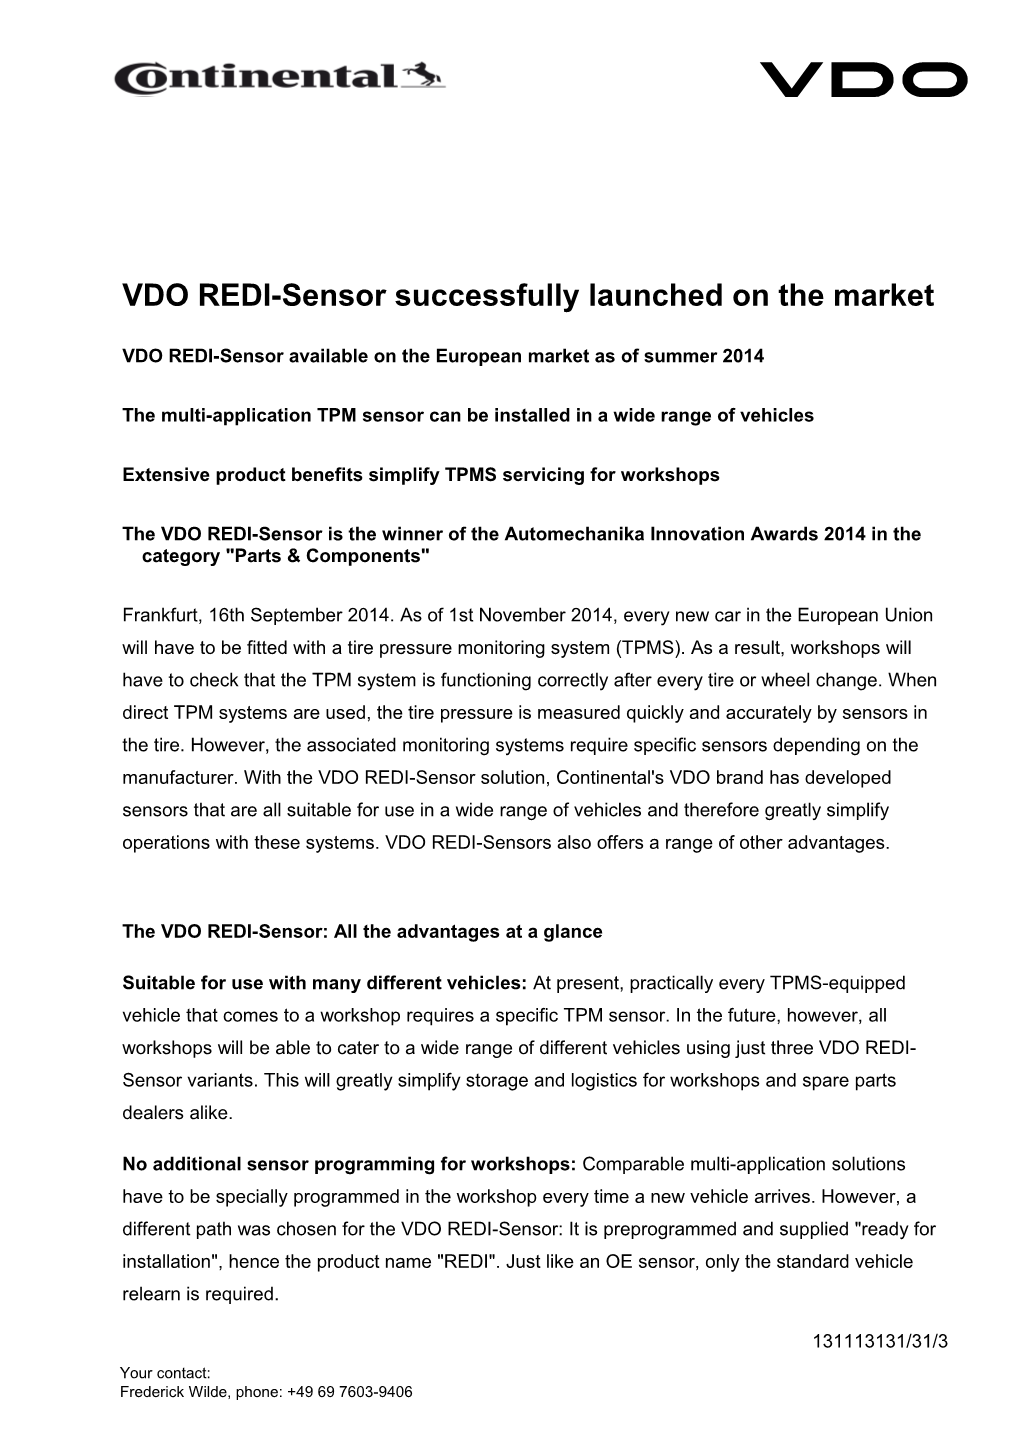 VDO REDI-Sensor Successfully Launched on the Market